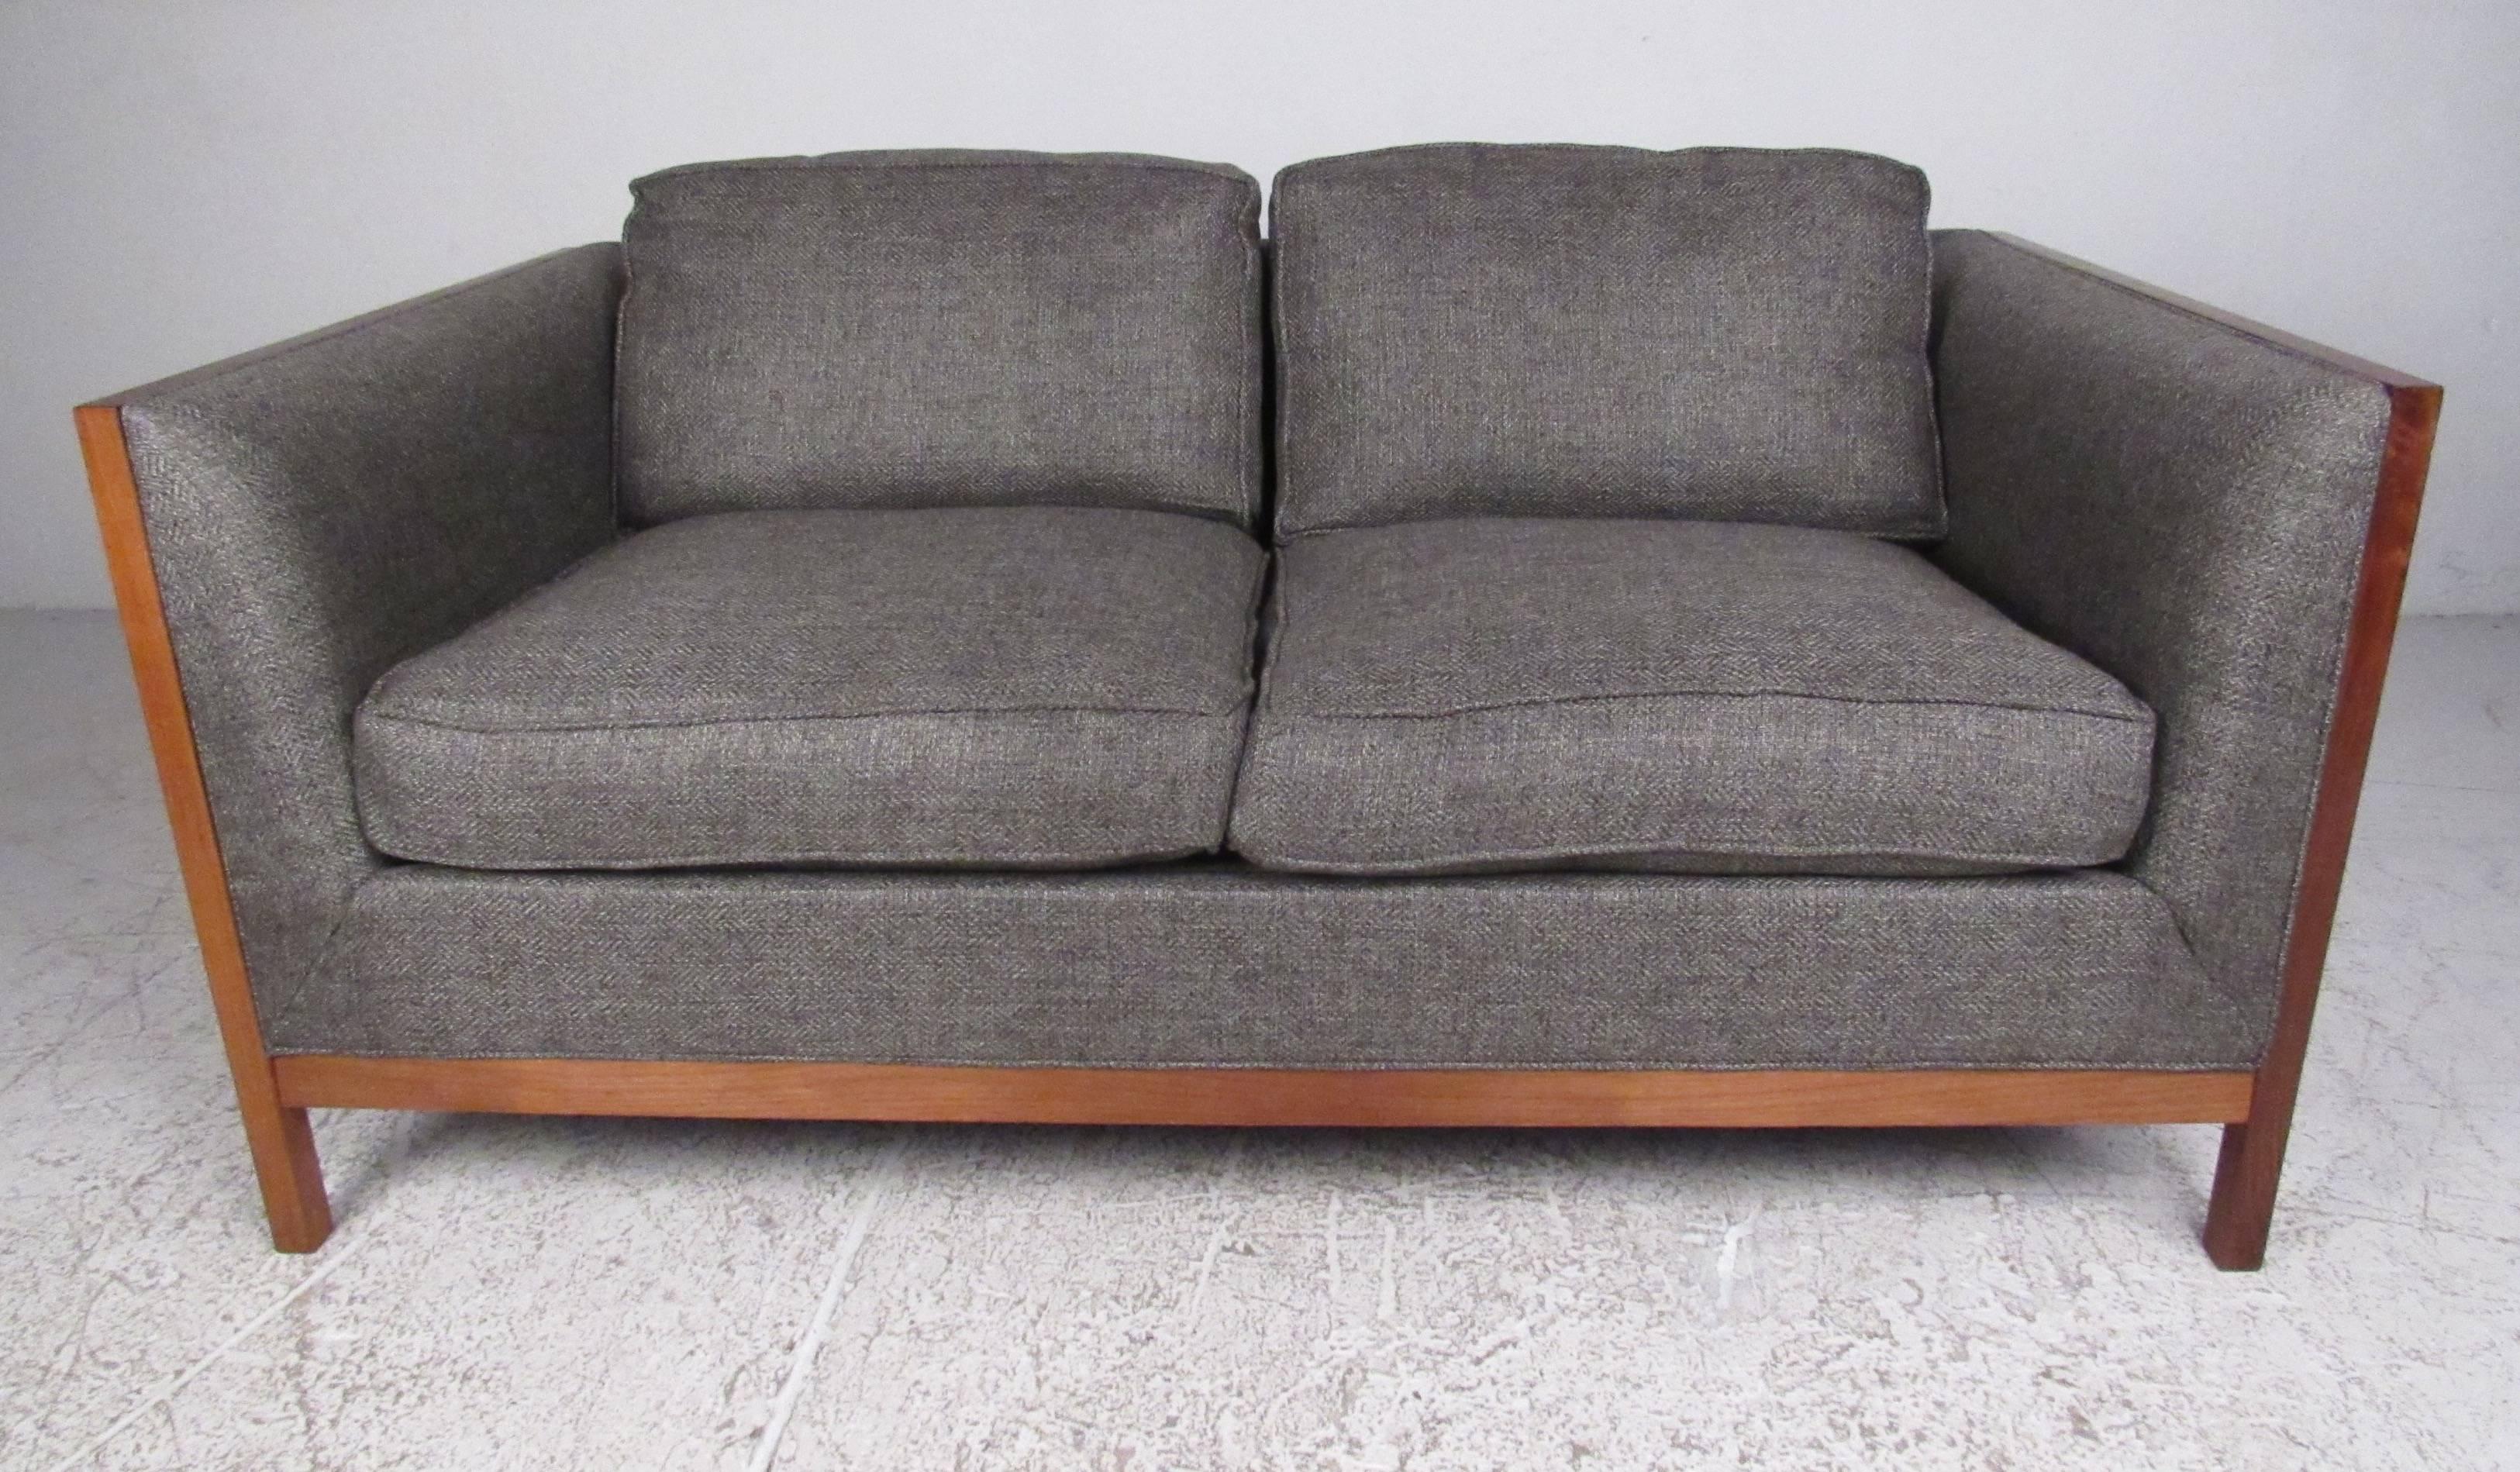 Comfortable and attractive, this solid walnut frame sofa by Stow Davis will make a stylish midcentury addition to any home or office environment. Please confirm item location (NY or NJ) with dealer.